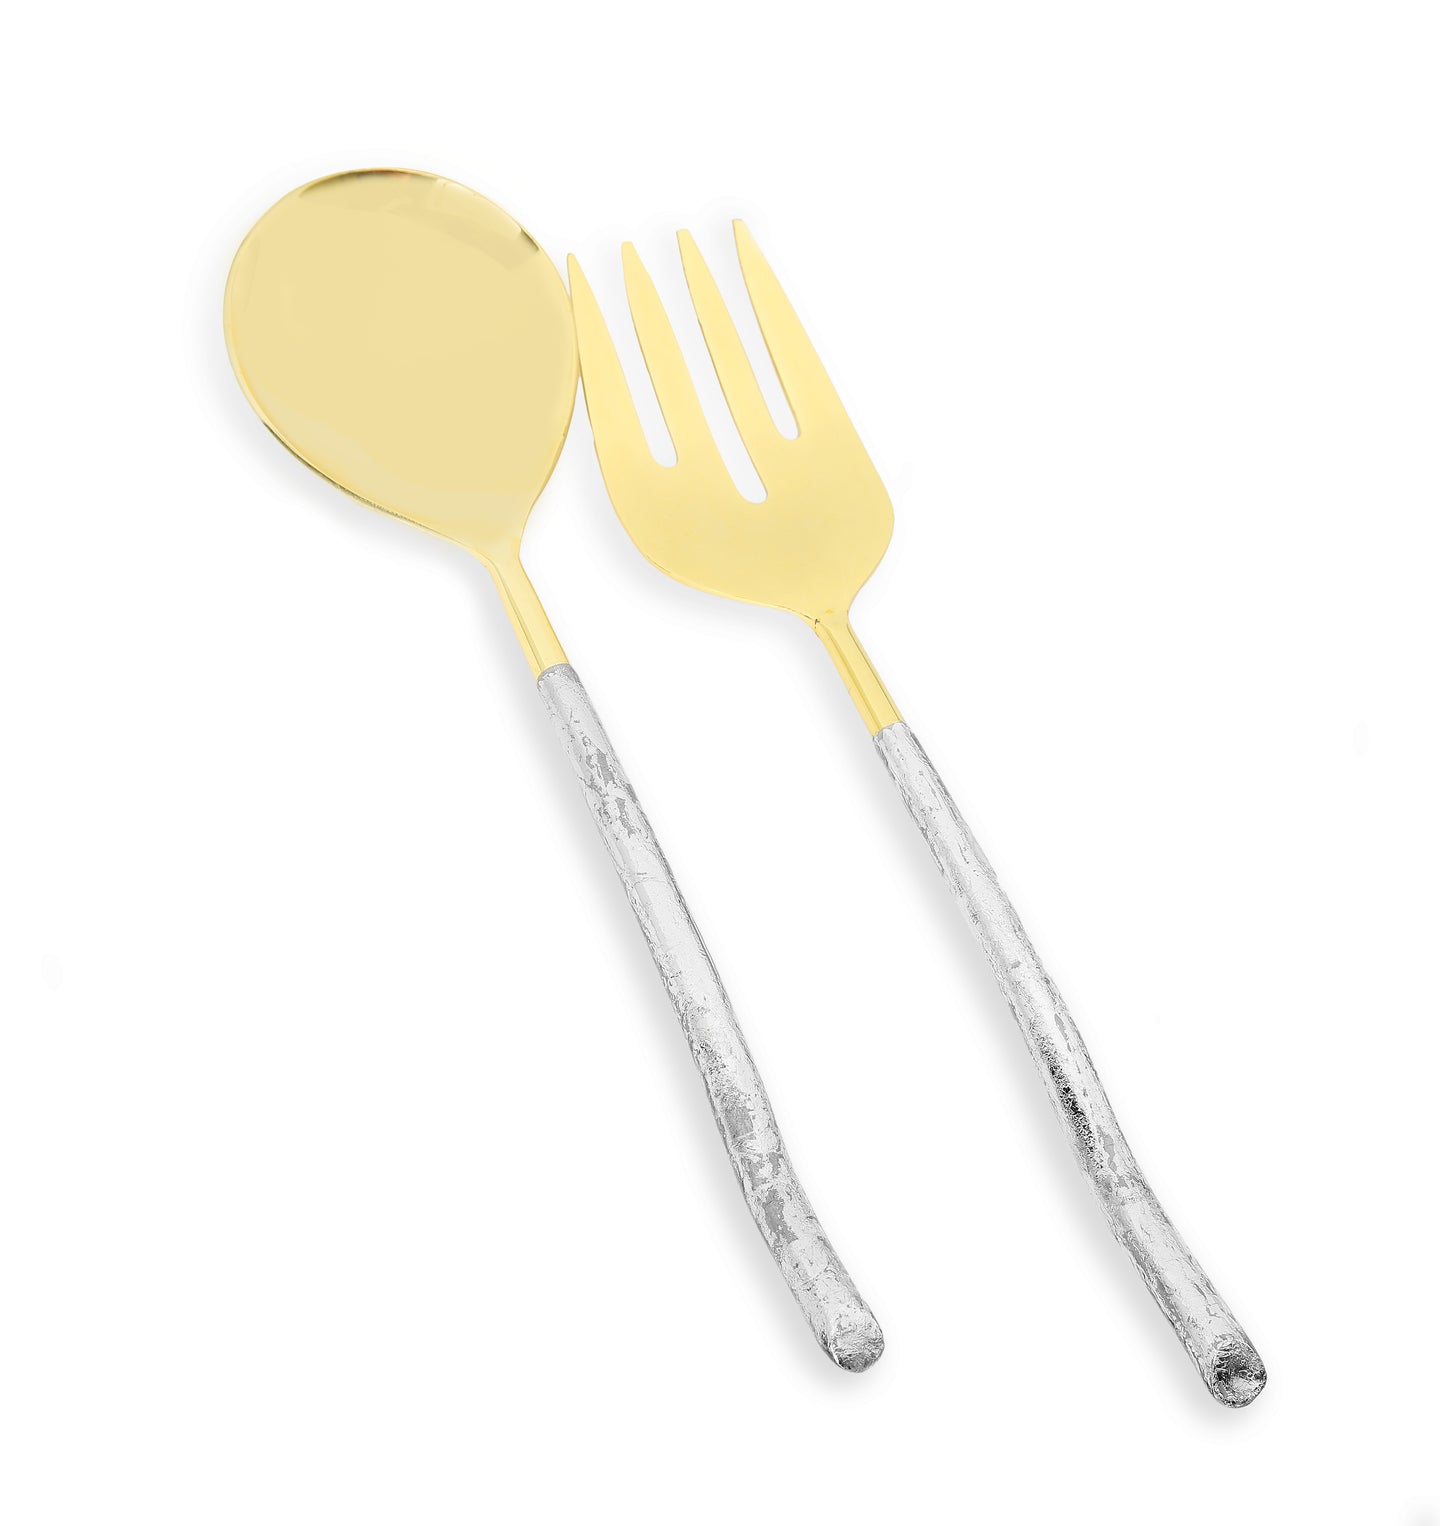 Set of 2 Gold Serving Spoons